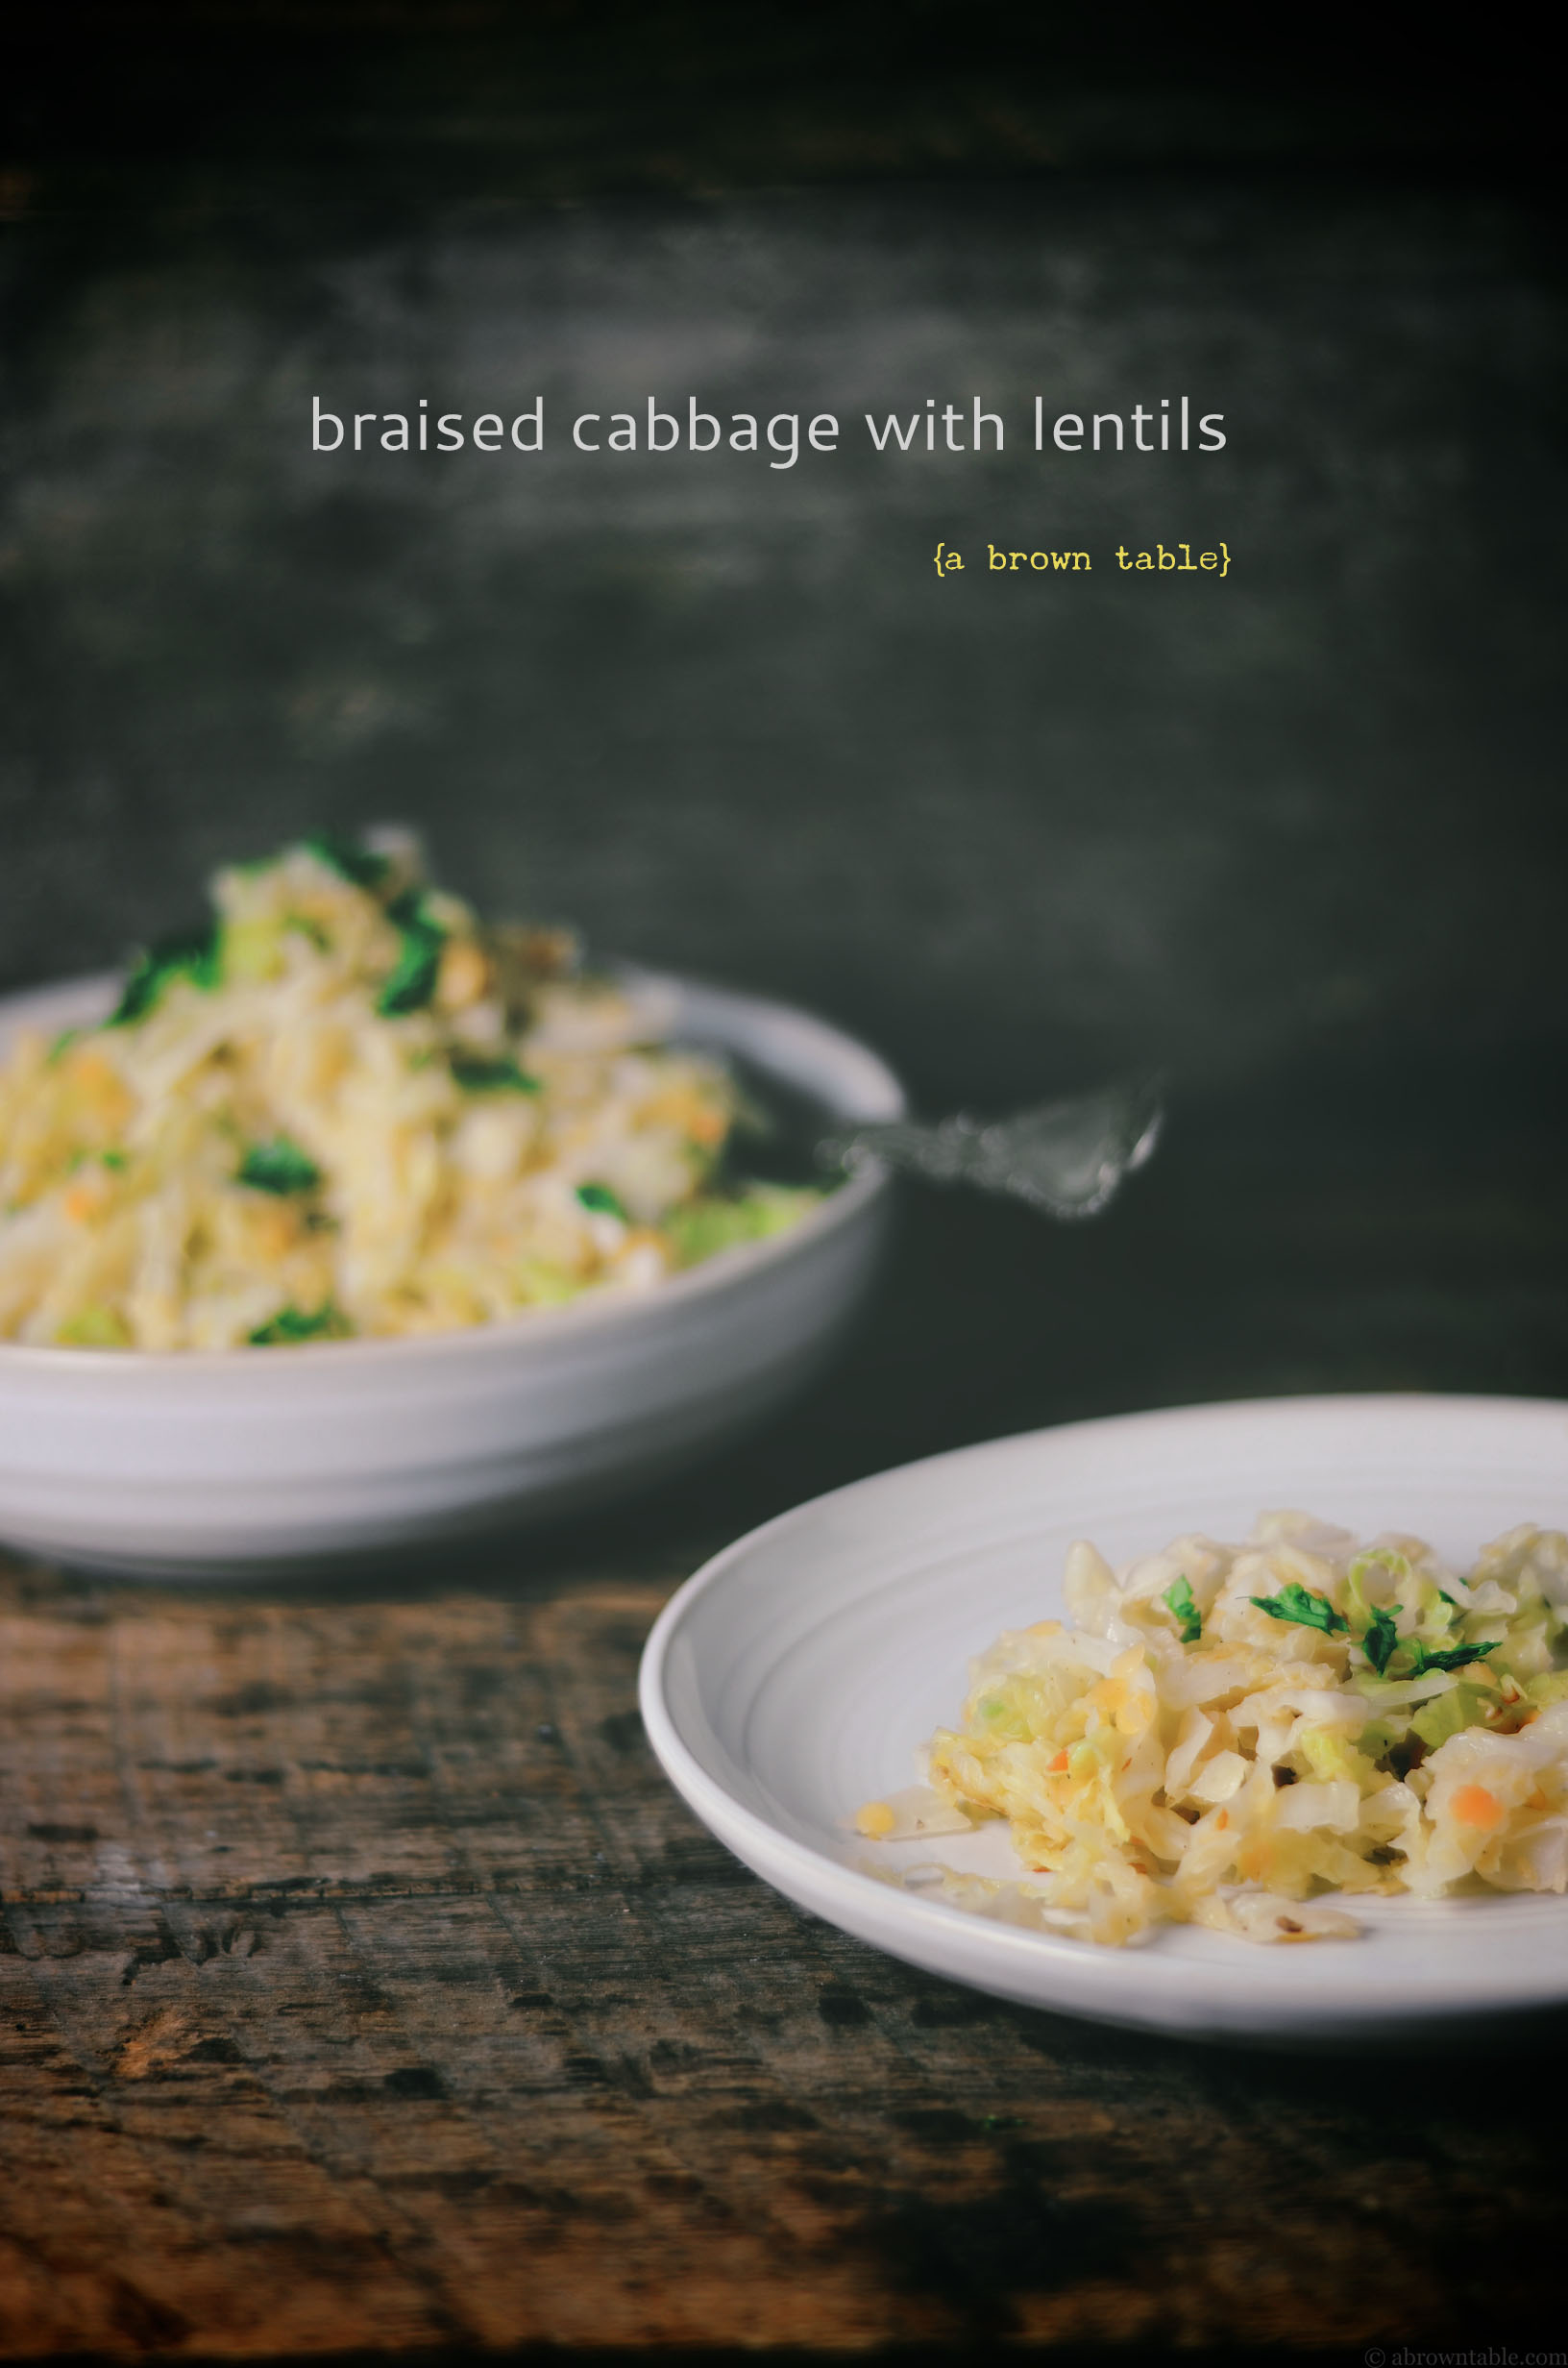 braised cabbage with lentils